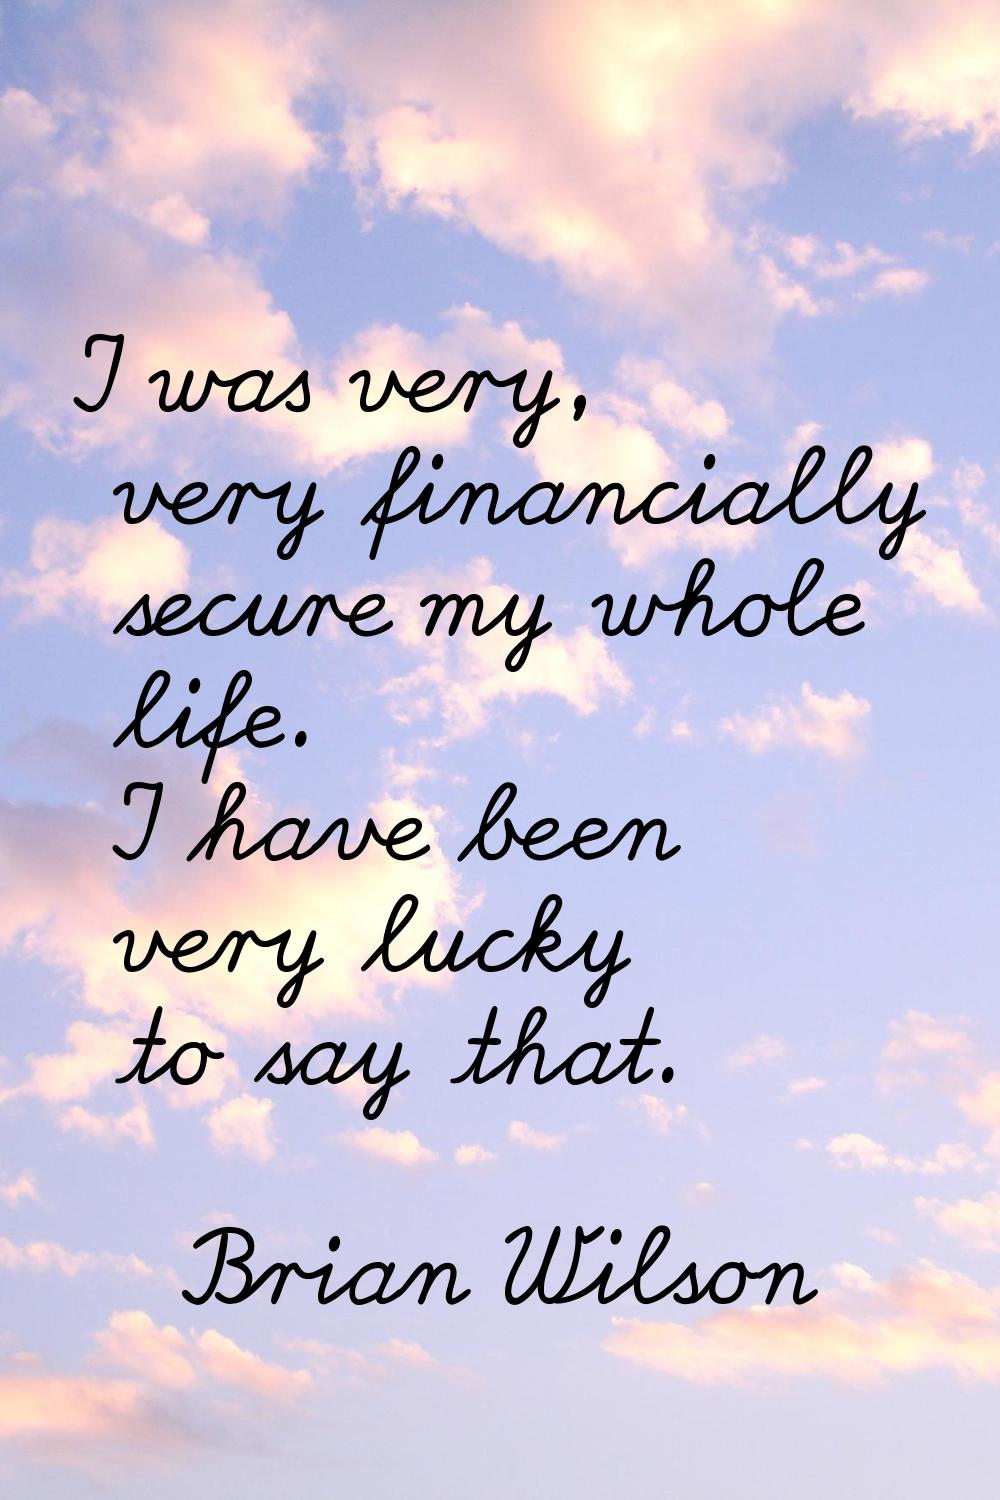 I was very, very financially secure my whole life. I have been very lucky to say that.